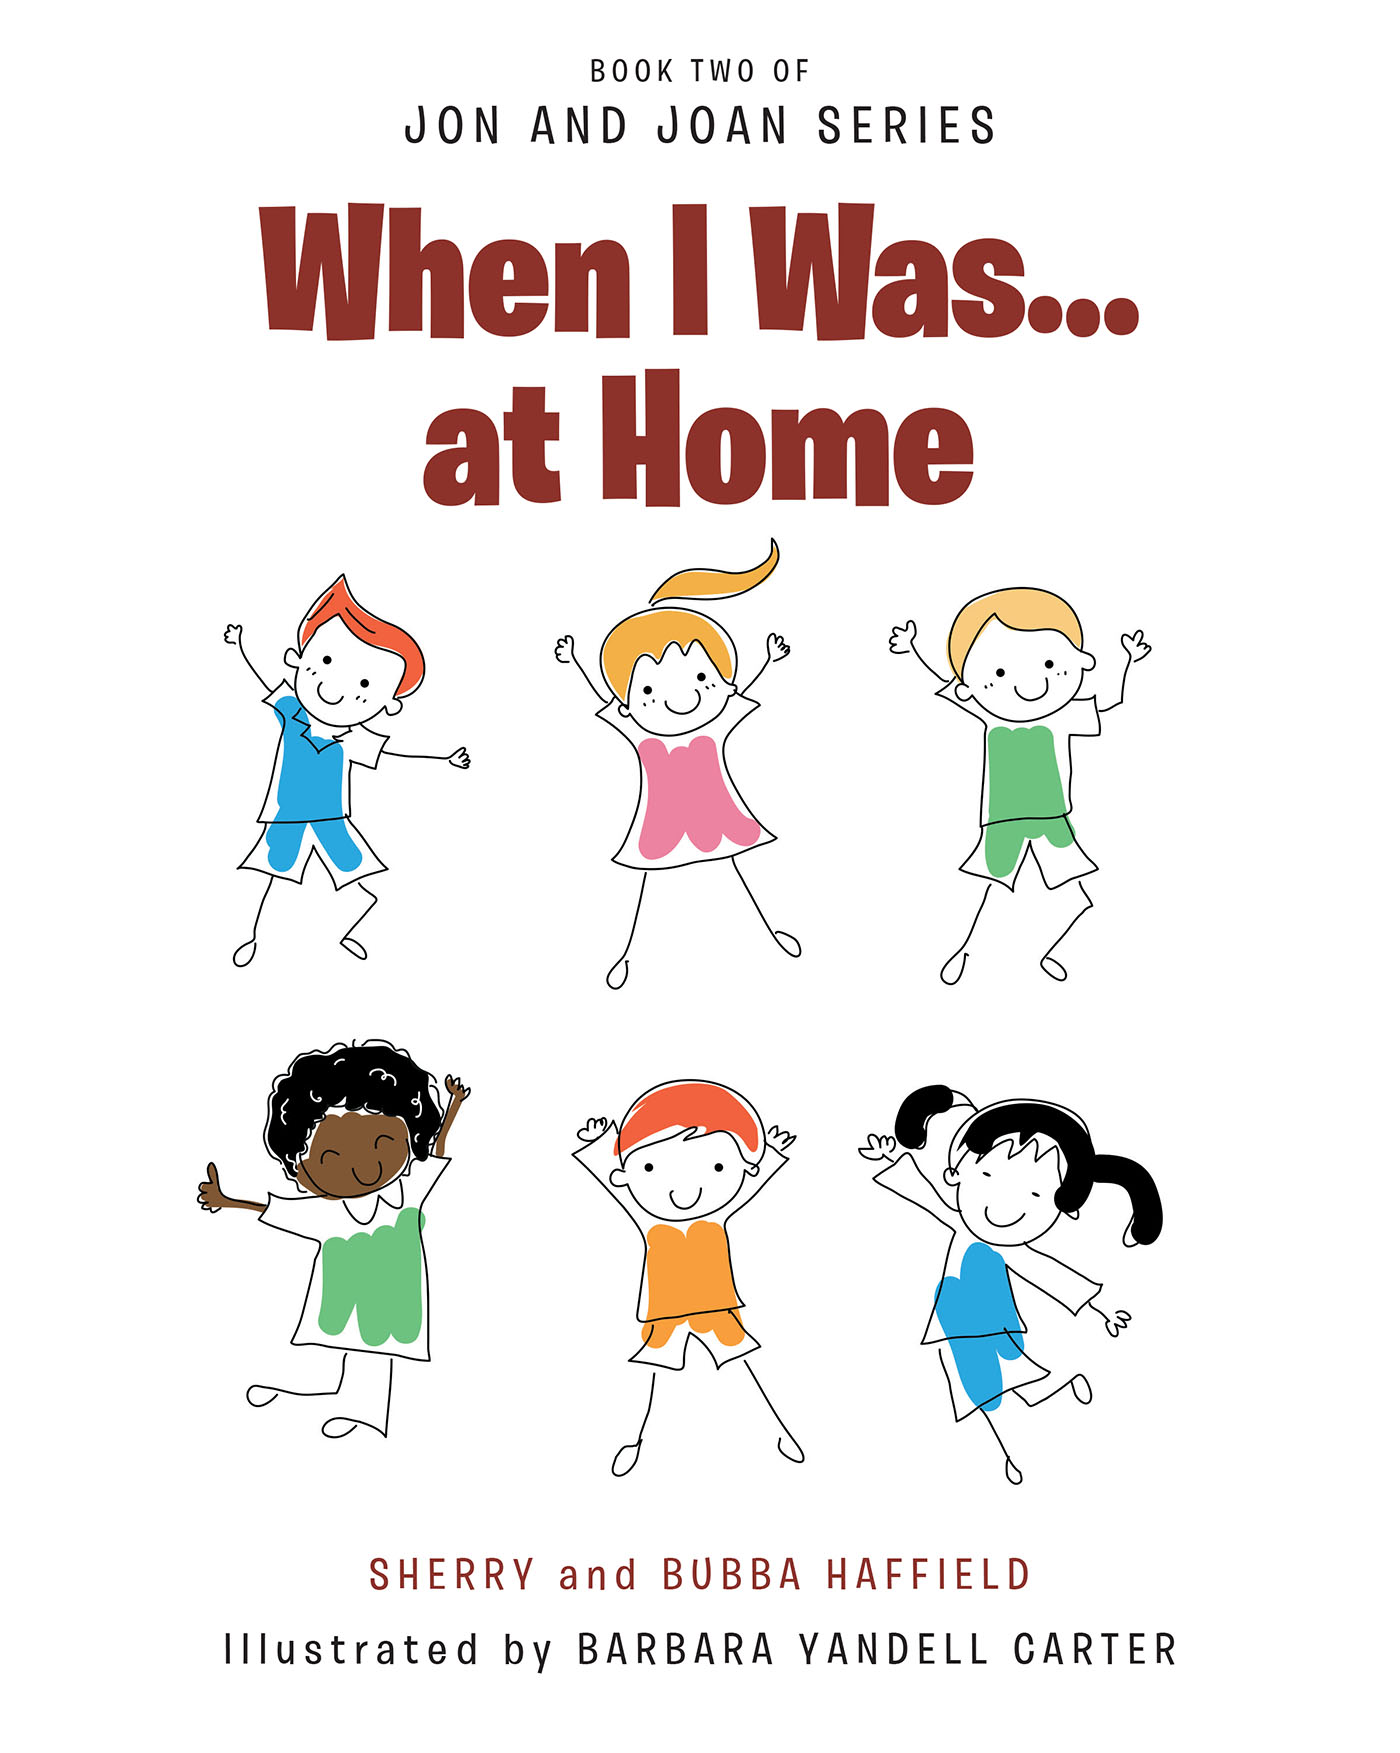 Sherry and Bubba Haffield’s Newly Released "When I Was… at Home" is a Charming Narrative That Explores the Differences Between Family Homes